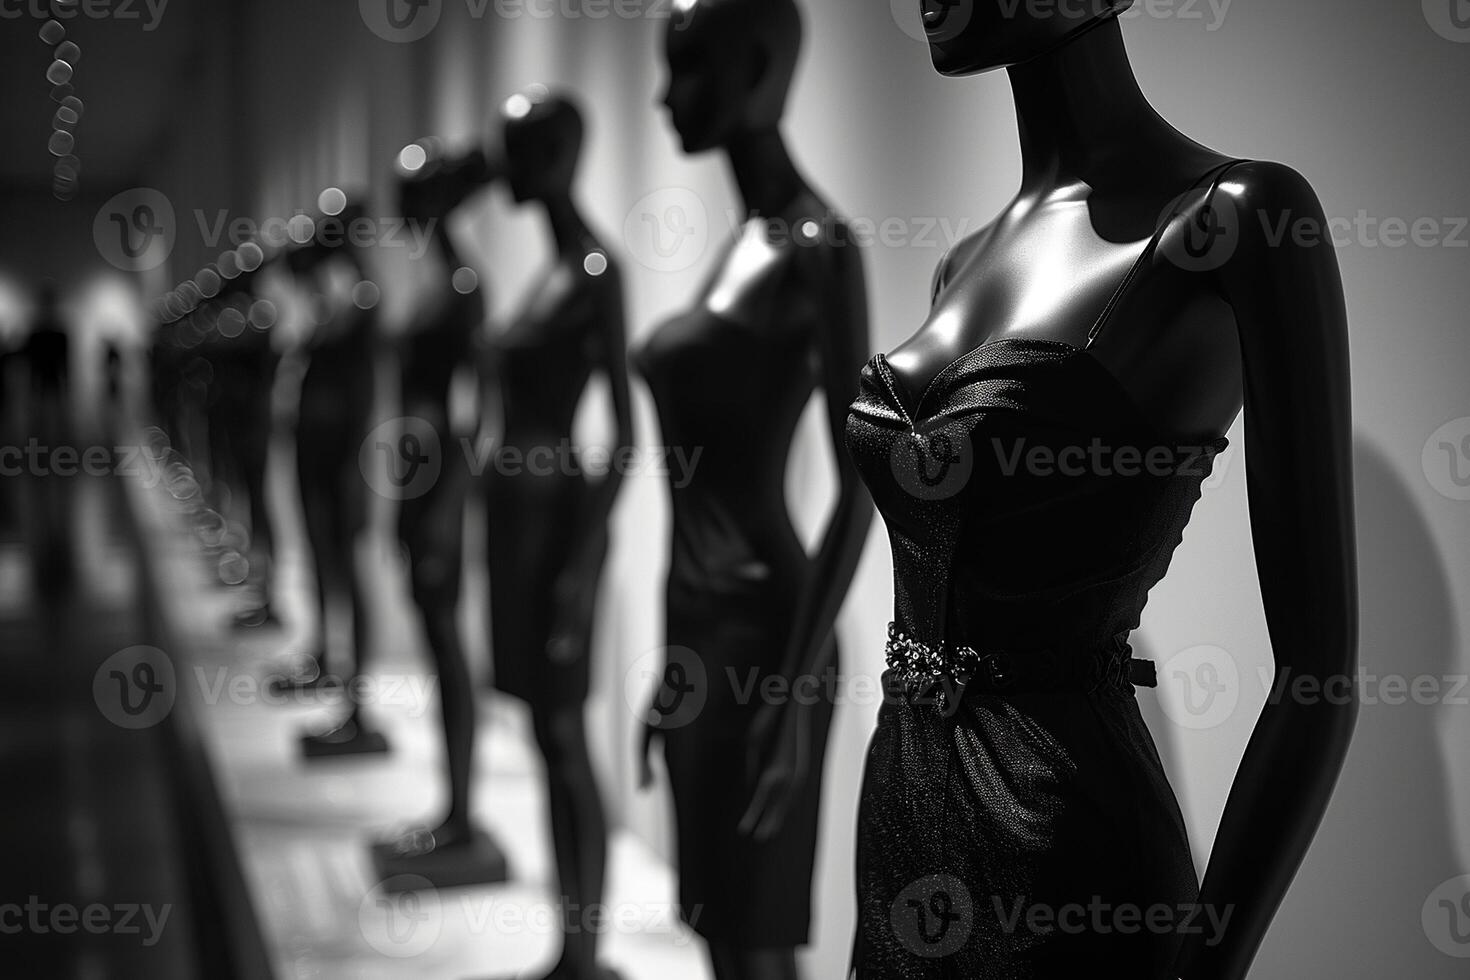 Luxurious fashionable black evening dresses on black mannequins standing in a row. Black and white image. Generated by artificial intelligence photo